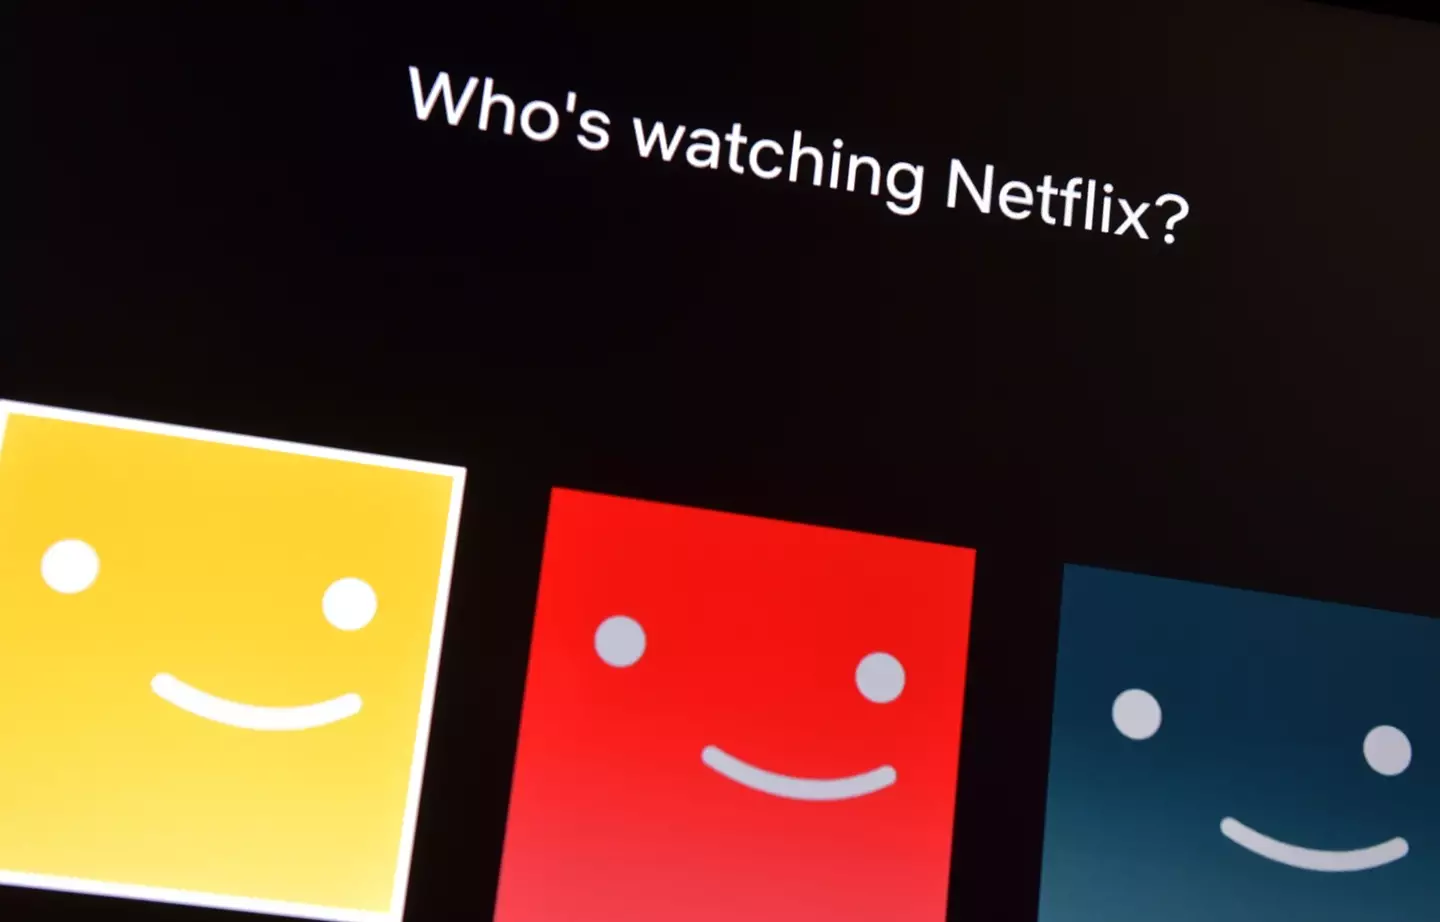 If all you watch is Netflix and other on-demand services, you will not need a TV Licence.